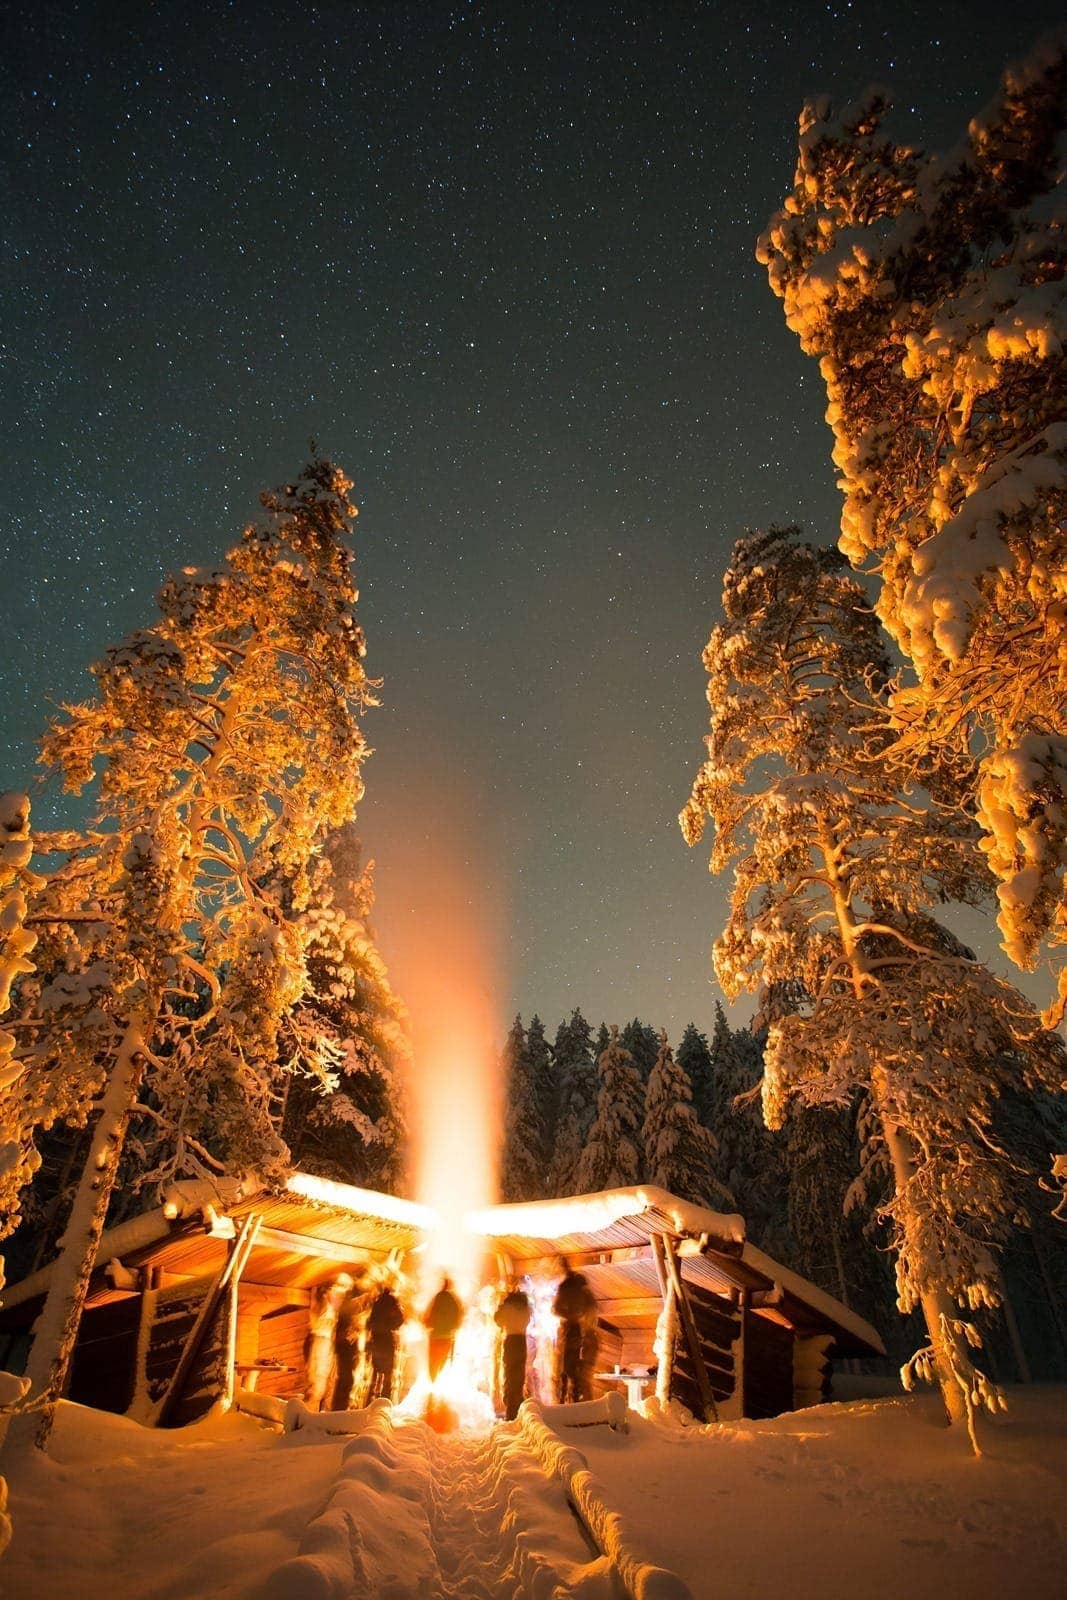 fire under the stars lapland finland iso syote northern lights safari